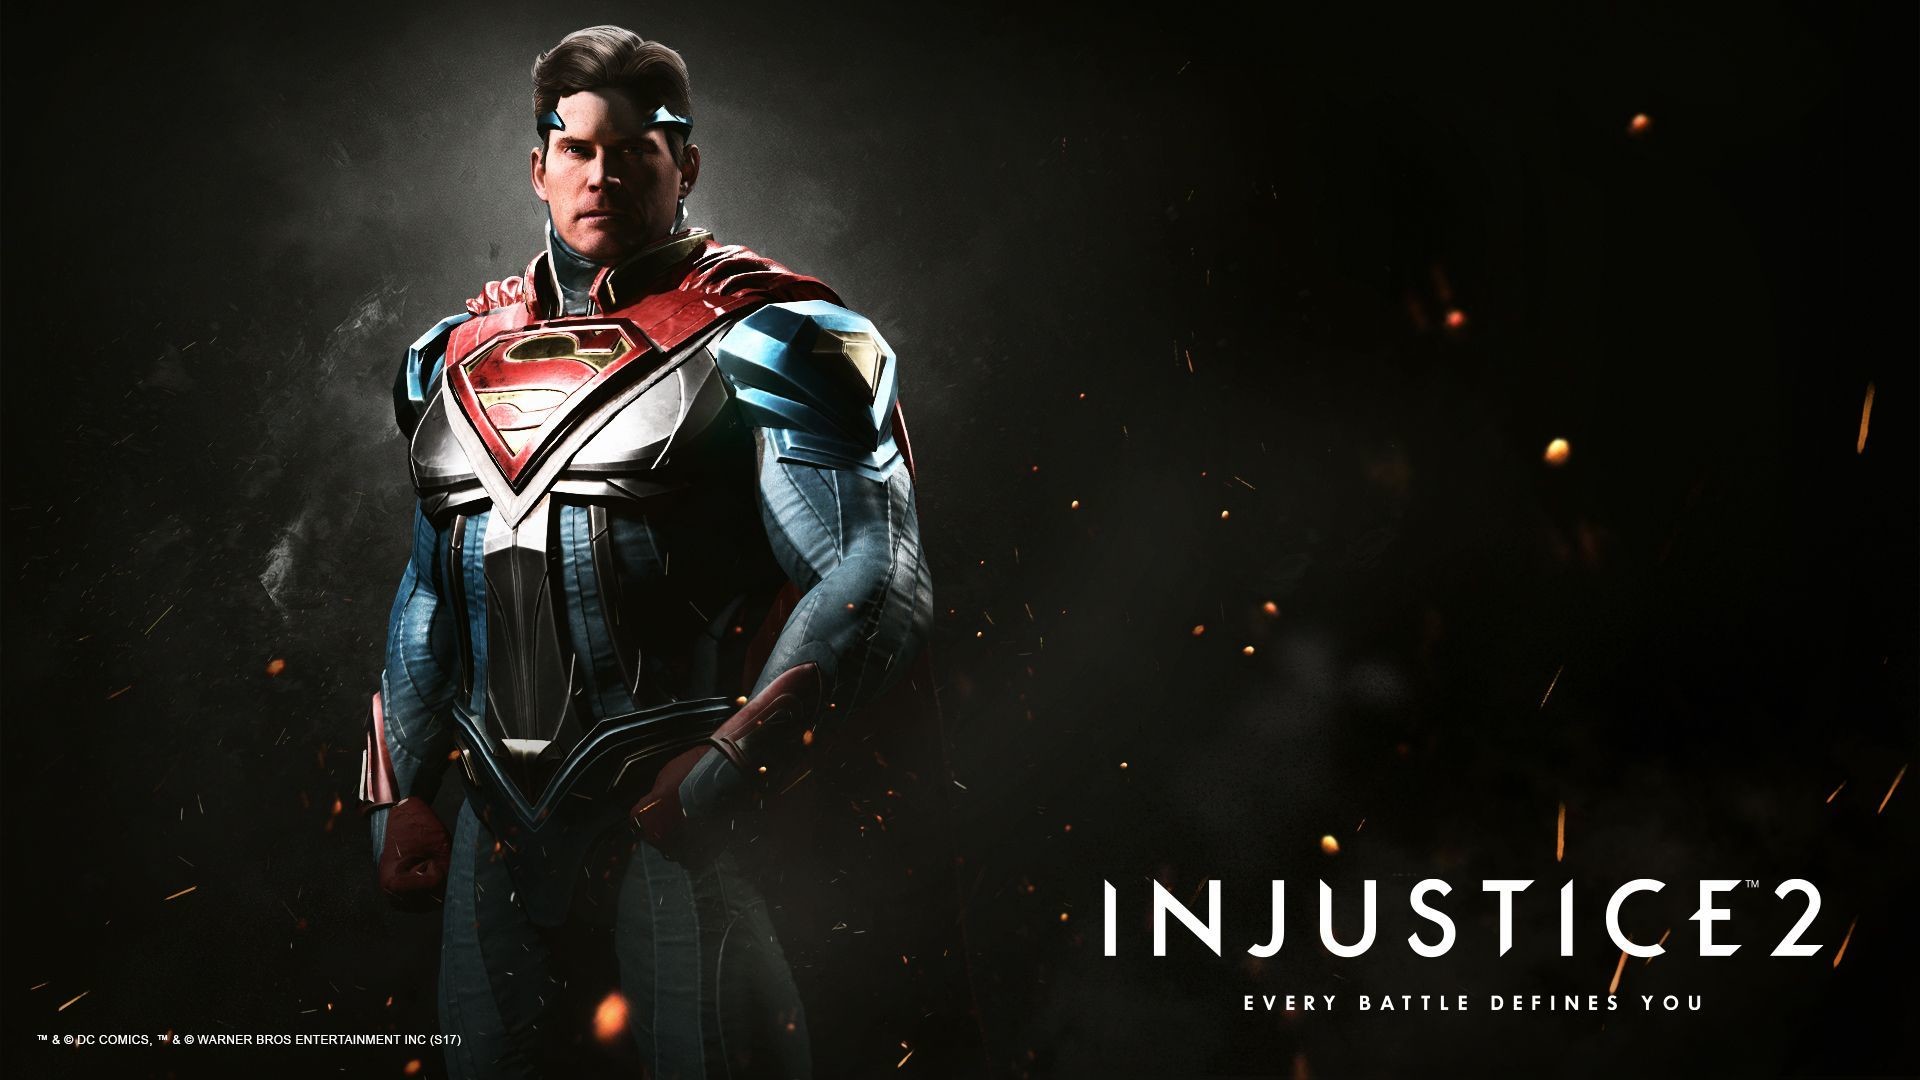 1920x1080 Download these and other “Injustice 2” wallpapers from Injustice.com.